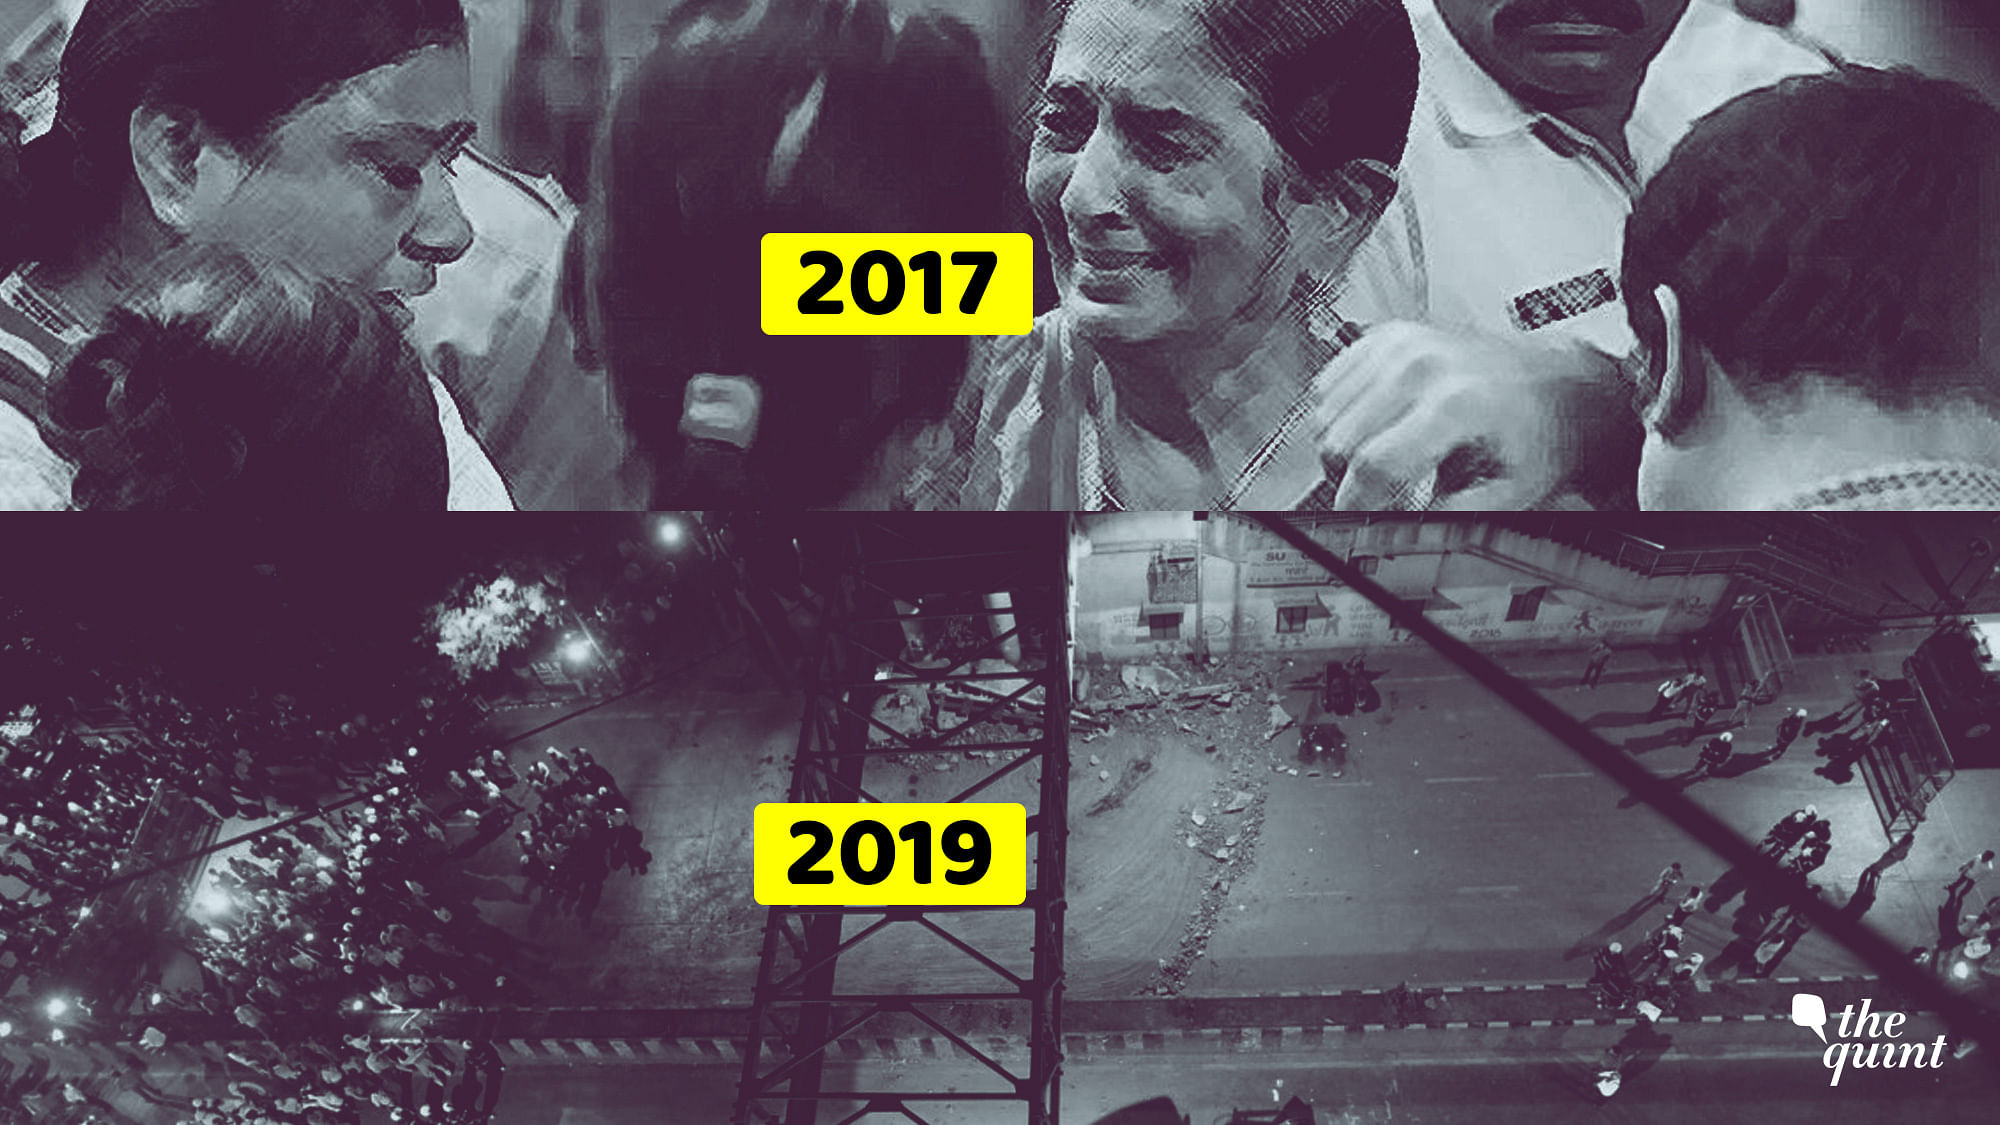 Narrow roads, political apathy, an inefficient BMC — whether in 2017 or in 2019, the solutions remain the same.